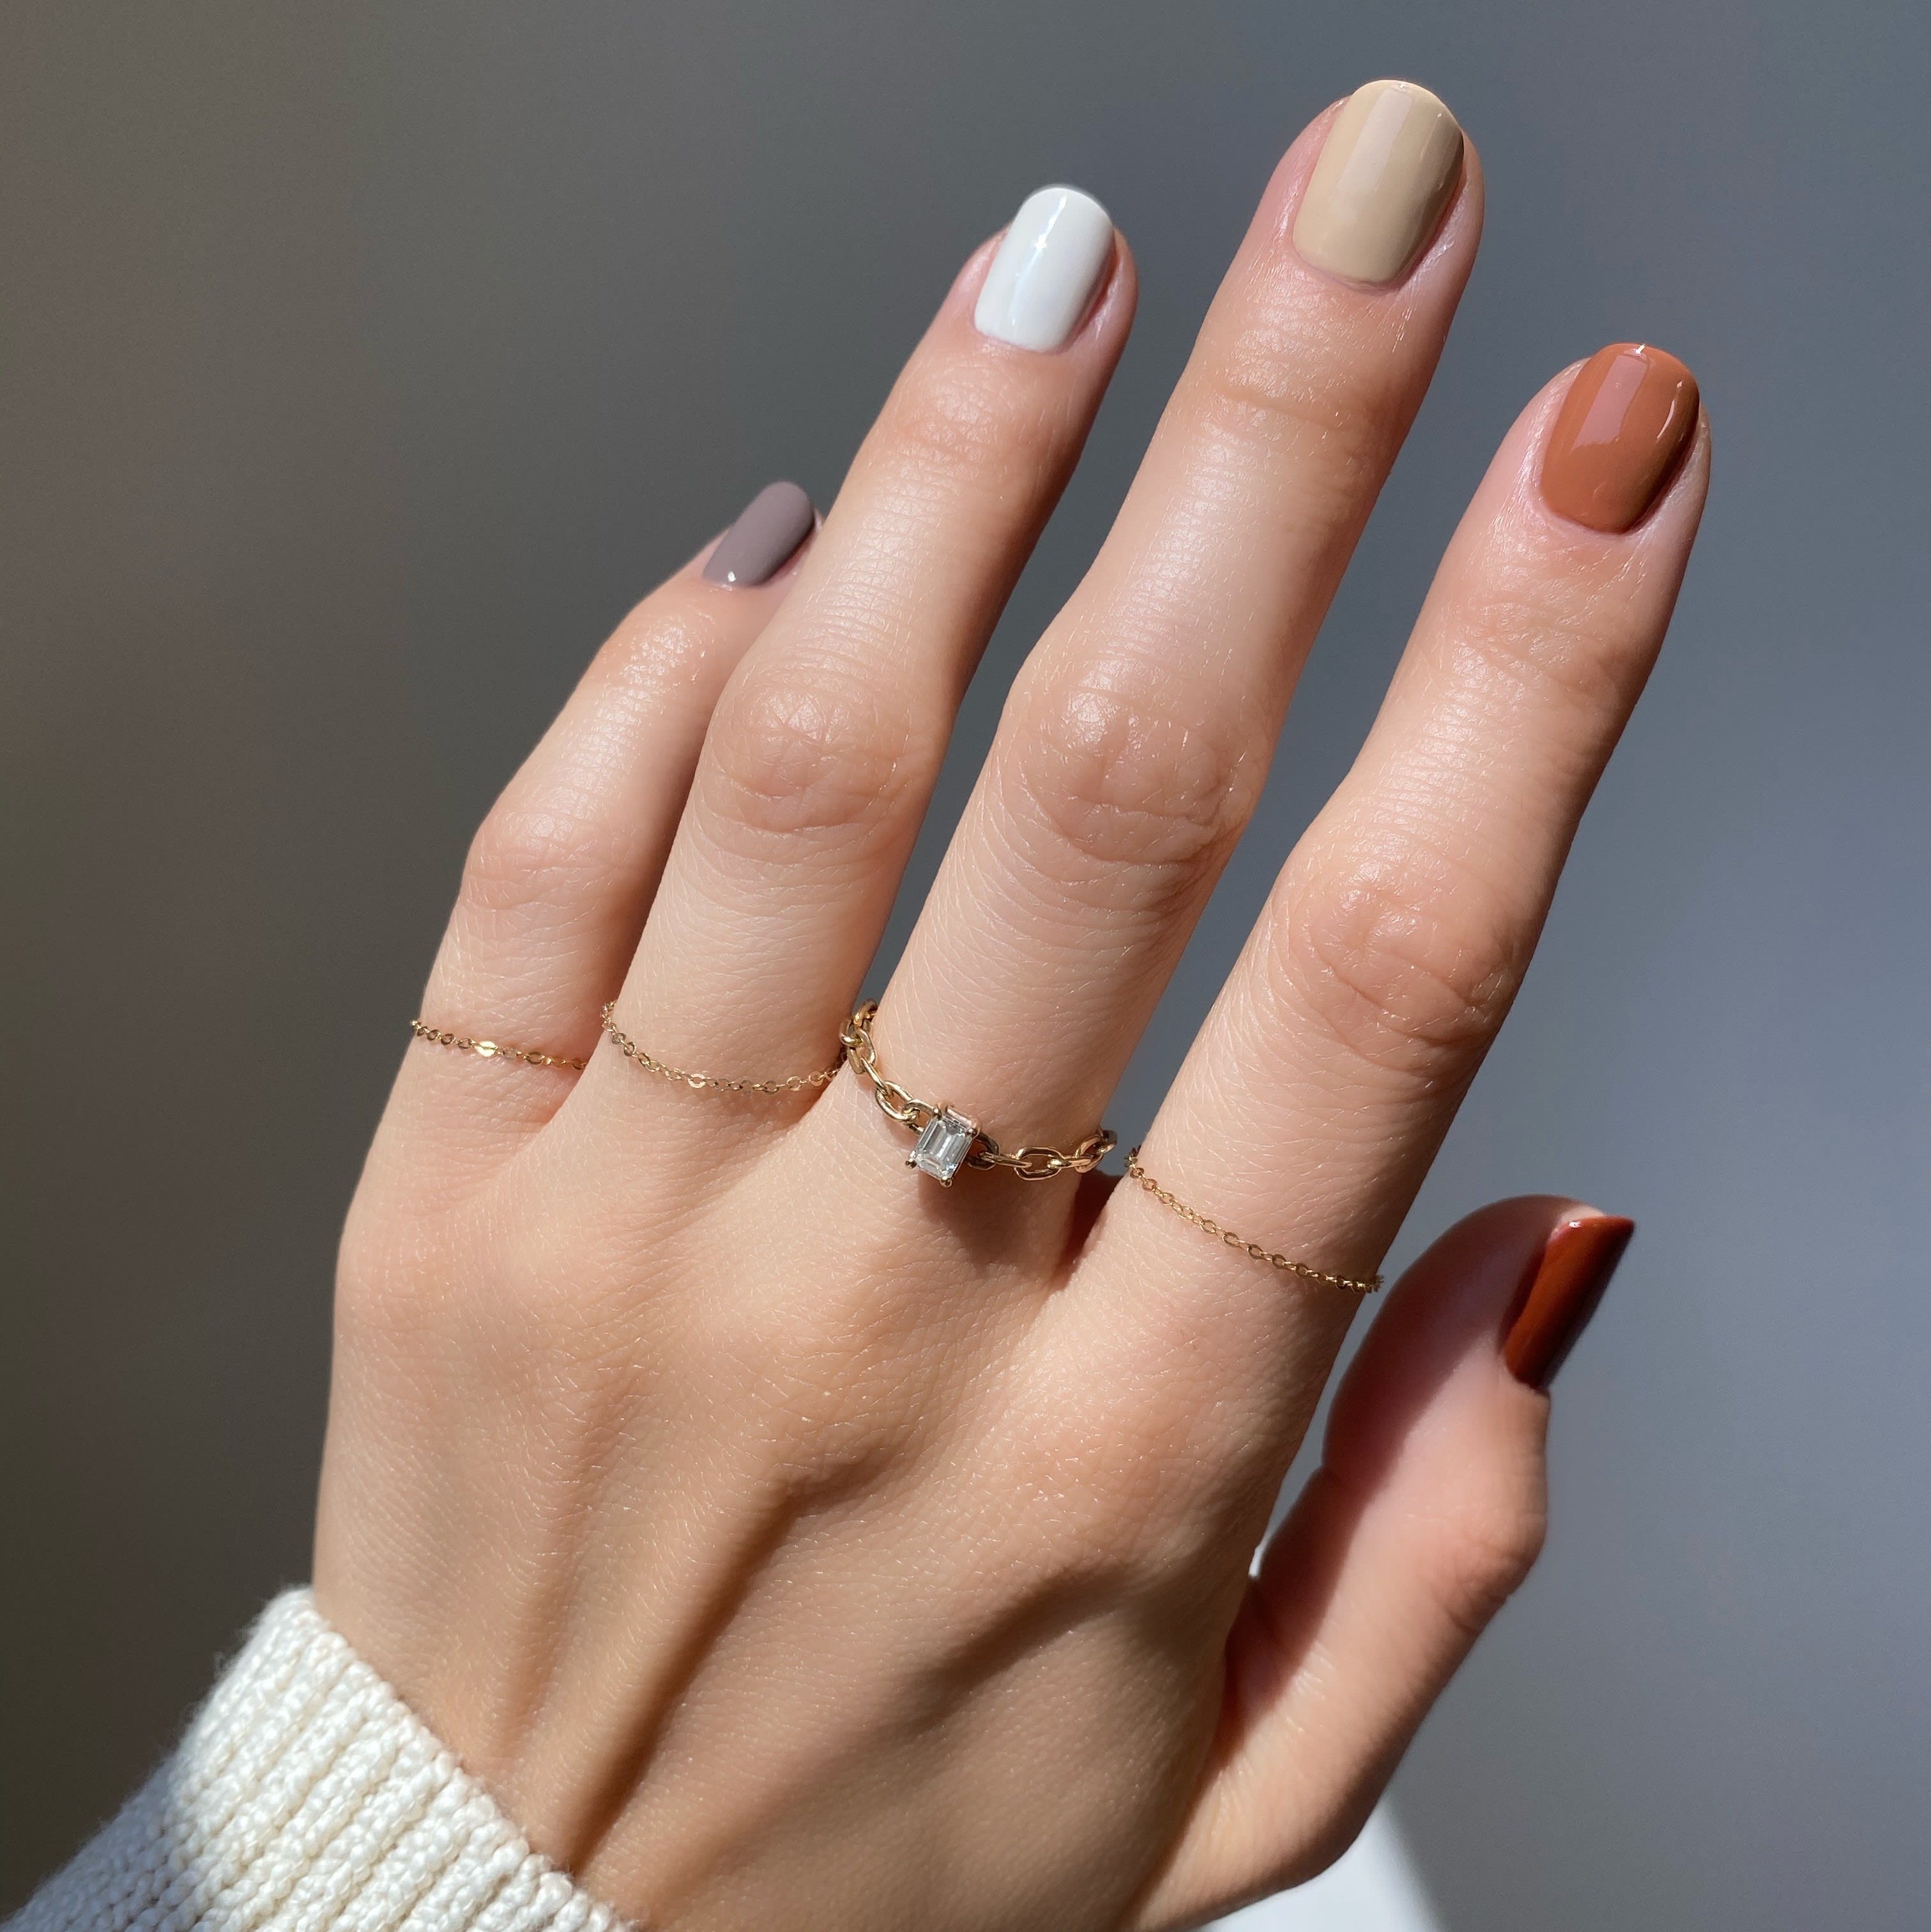 Update Your Mani With Transitional Fall Nail Colors - Lulus.com Fashion